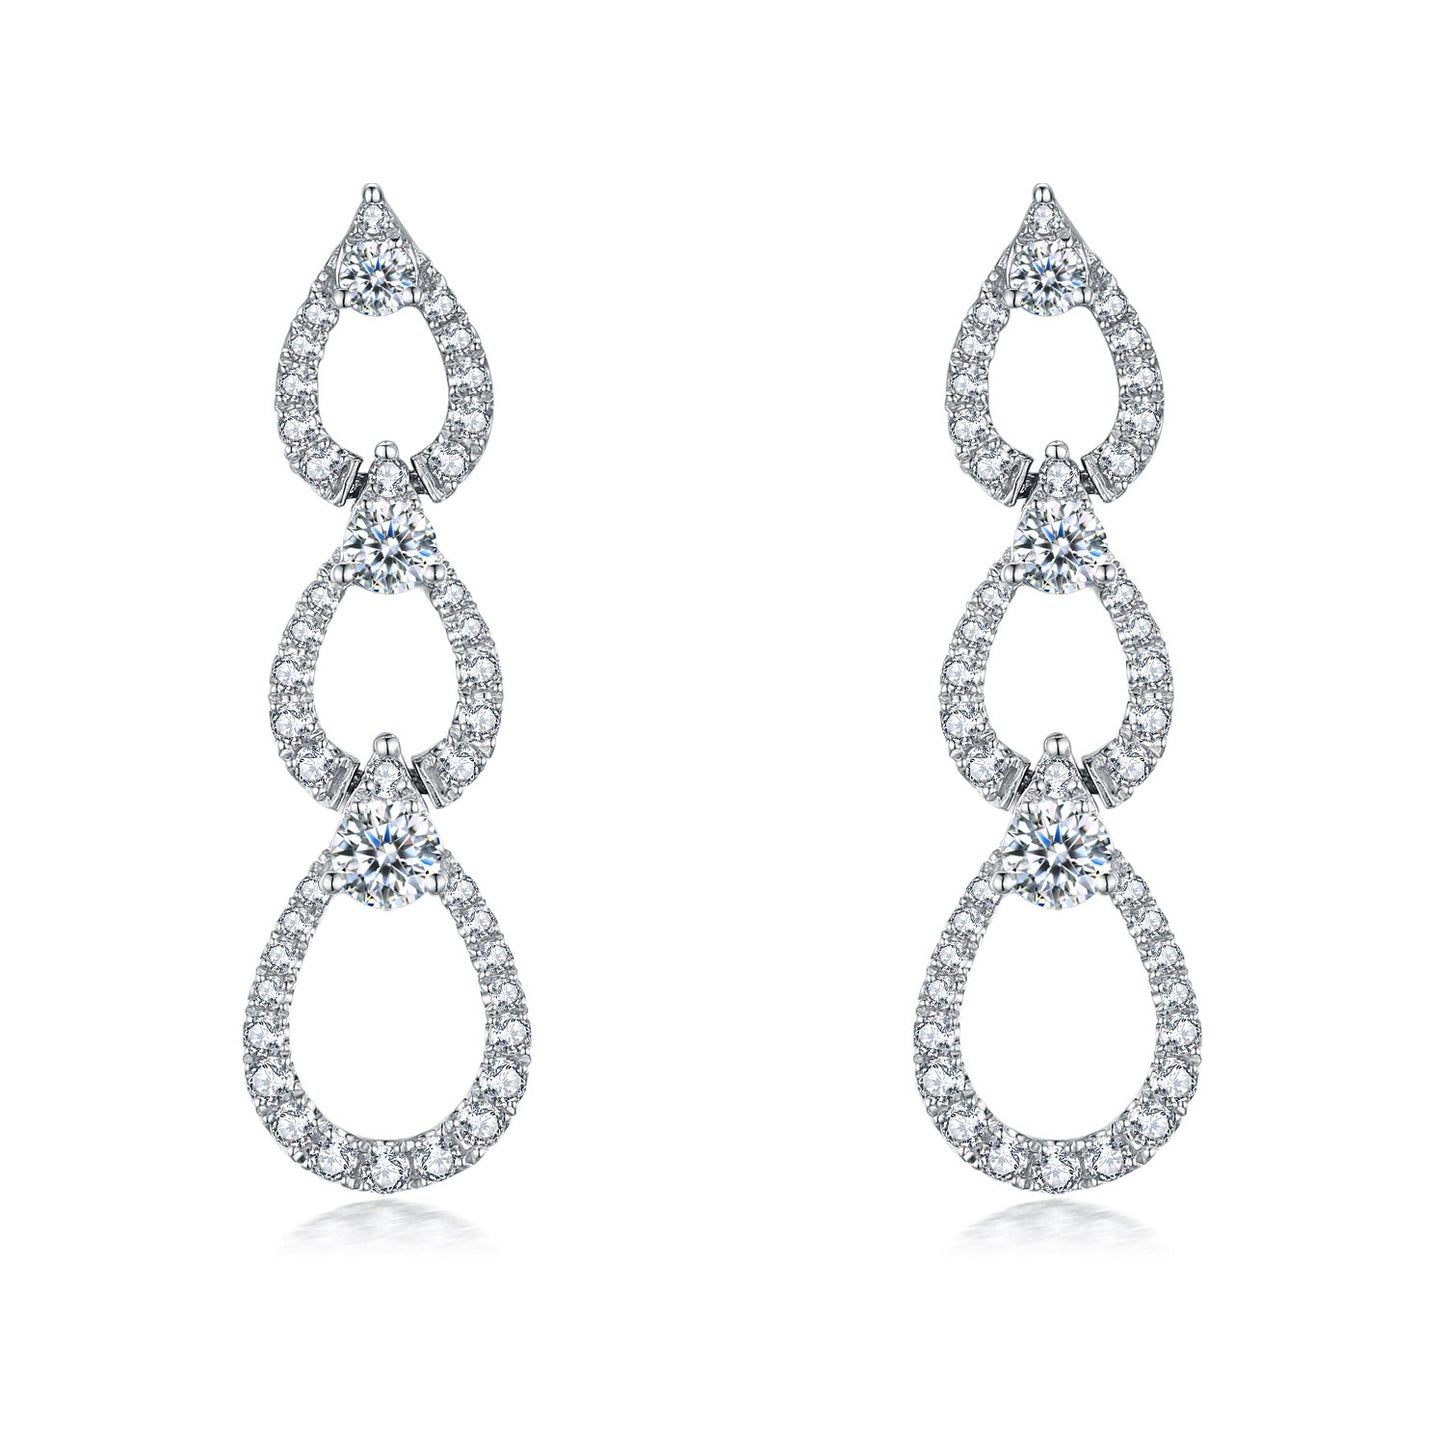 LEGACY--K18 White Gold and Diamonds Drop Earrings